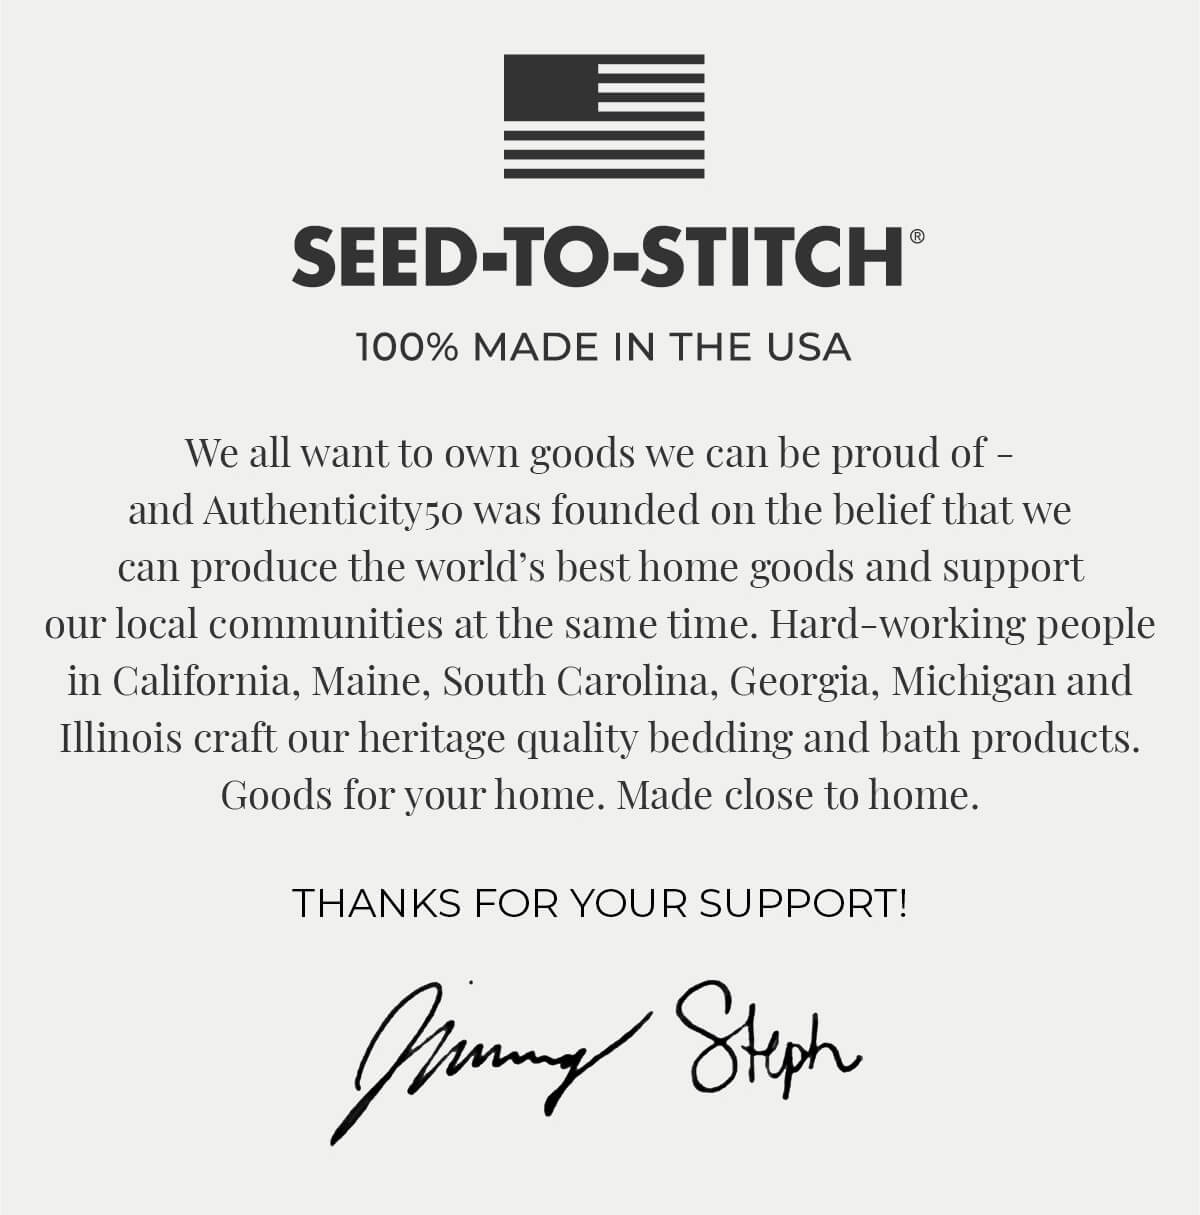 seed-to-stitch made in usa